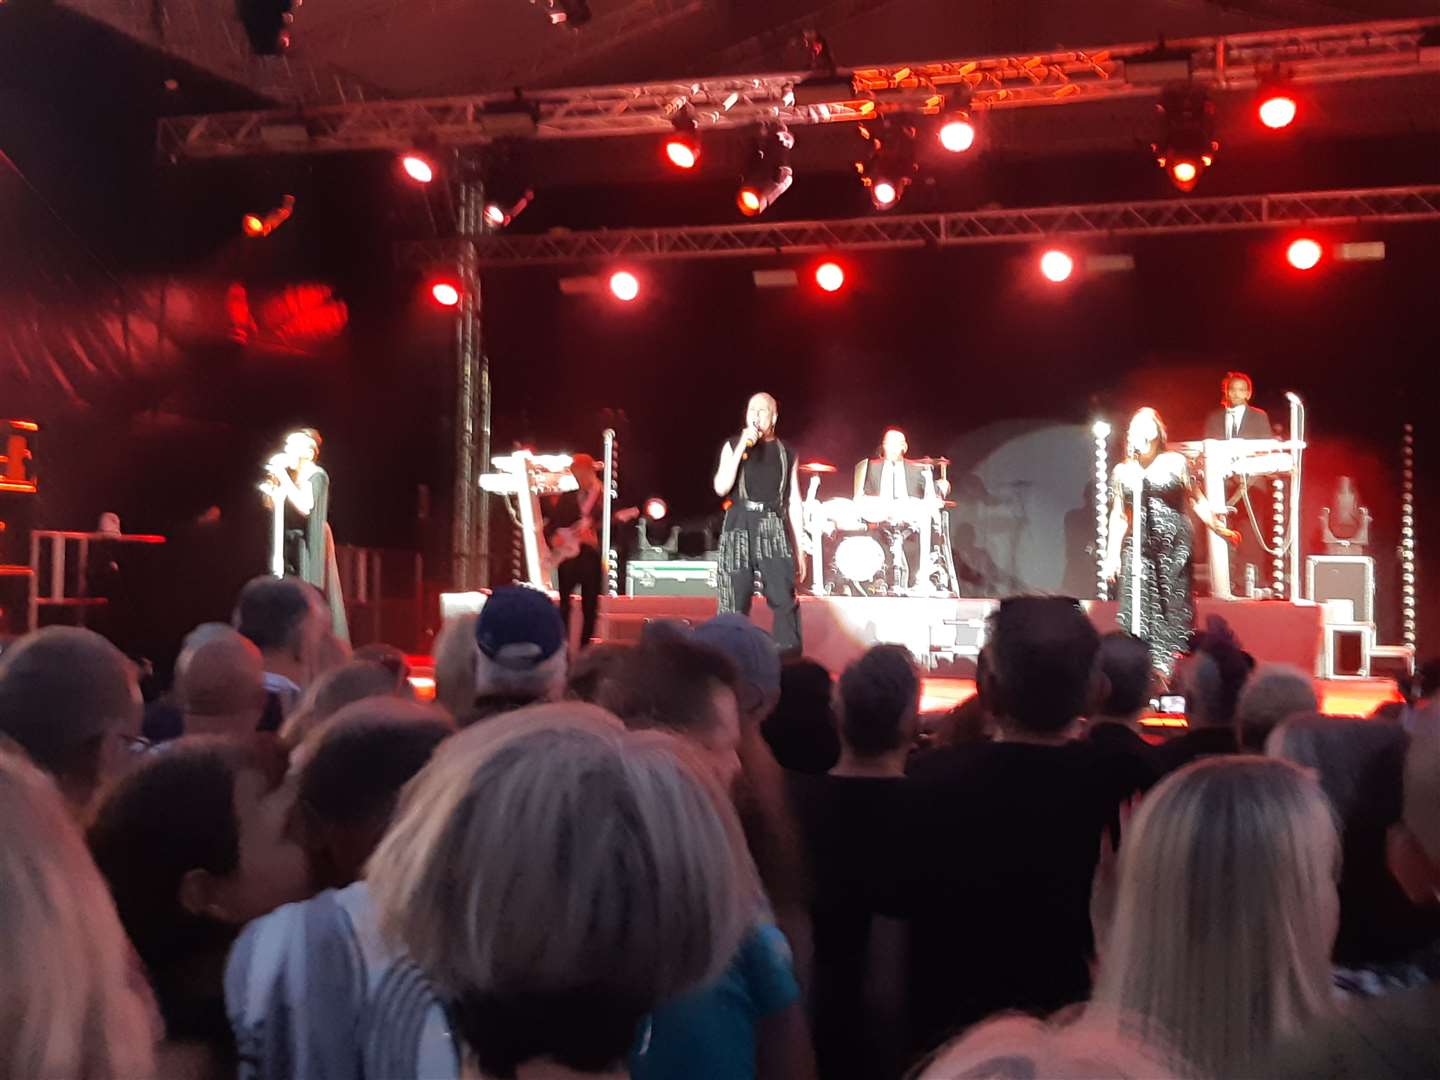 The Human League headlined the first night at Rochester Castle Concerts